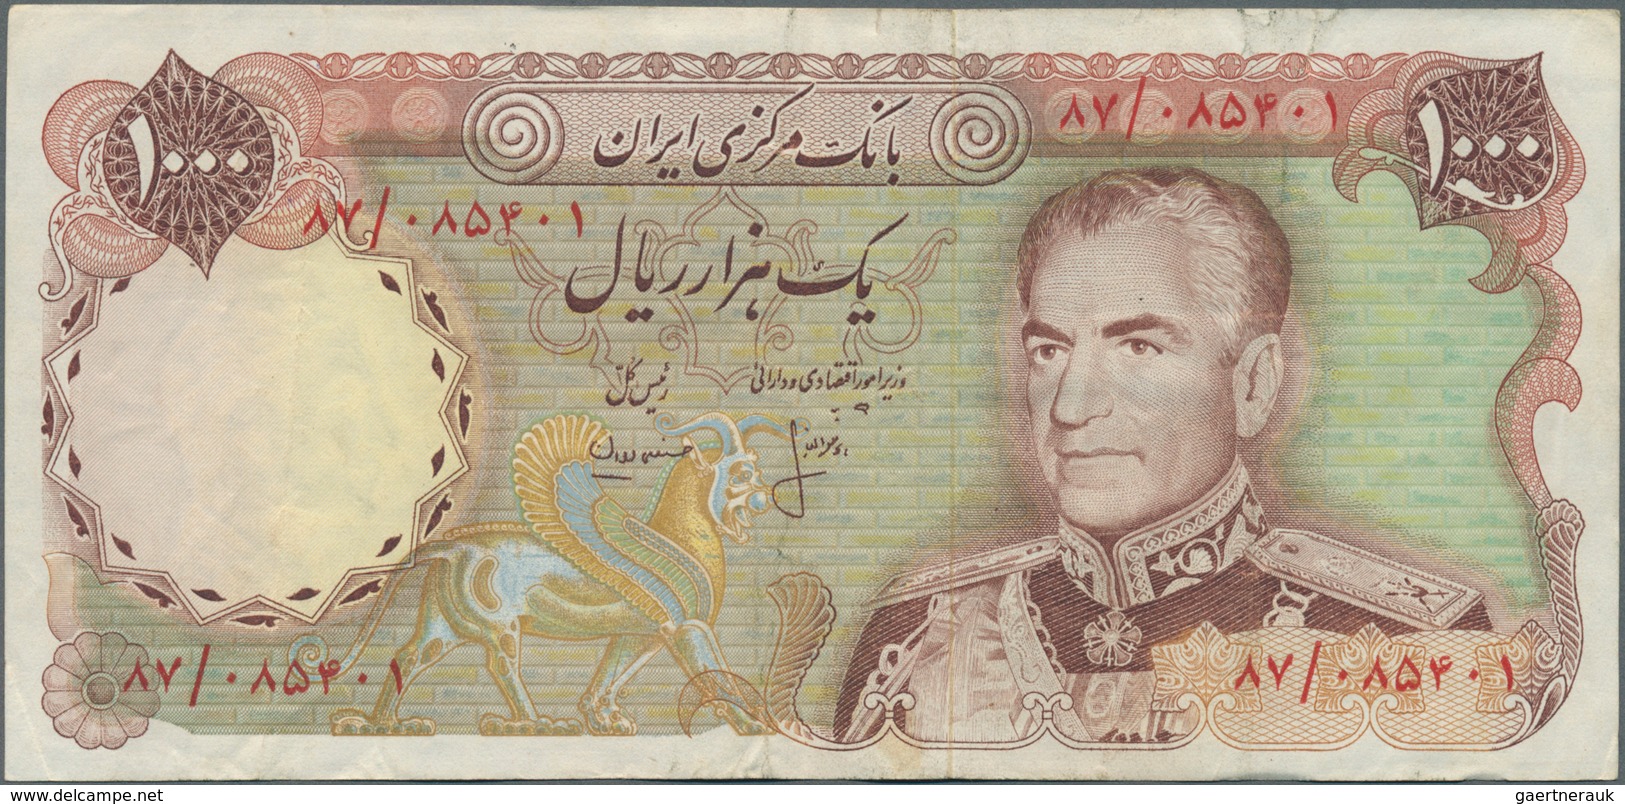 02790 Iran: Bundle Of 86 Pcs 1000 Rials ND P. 105b, All Used In Condition From F- To VF. (86 Pcs) - Iran